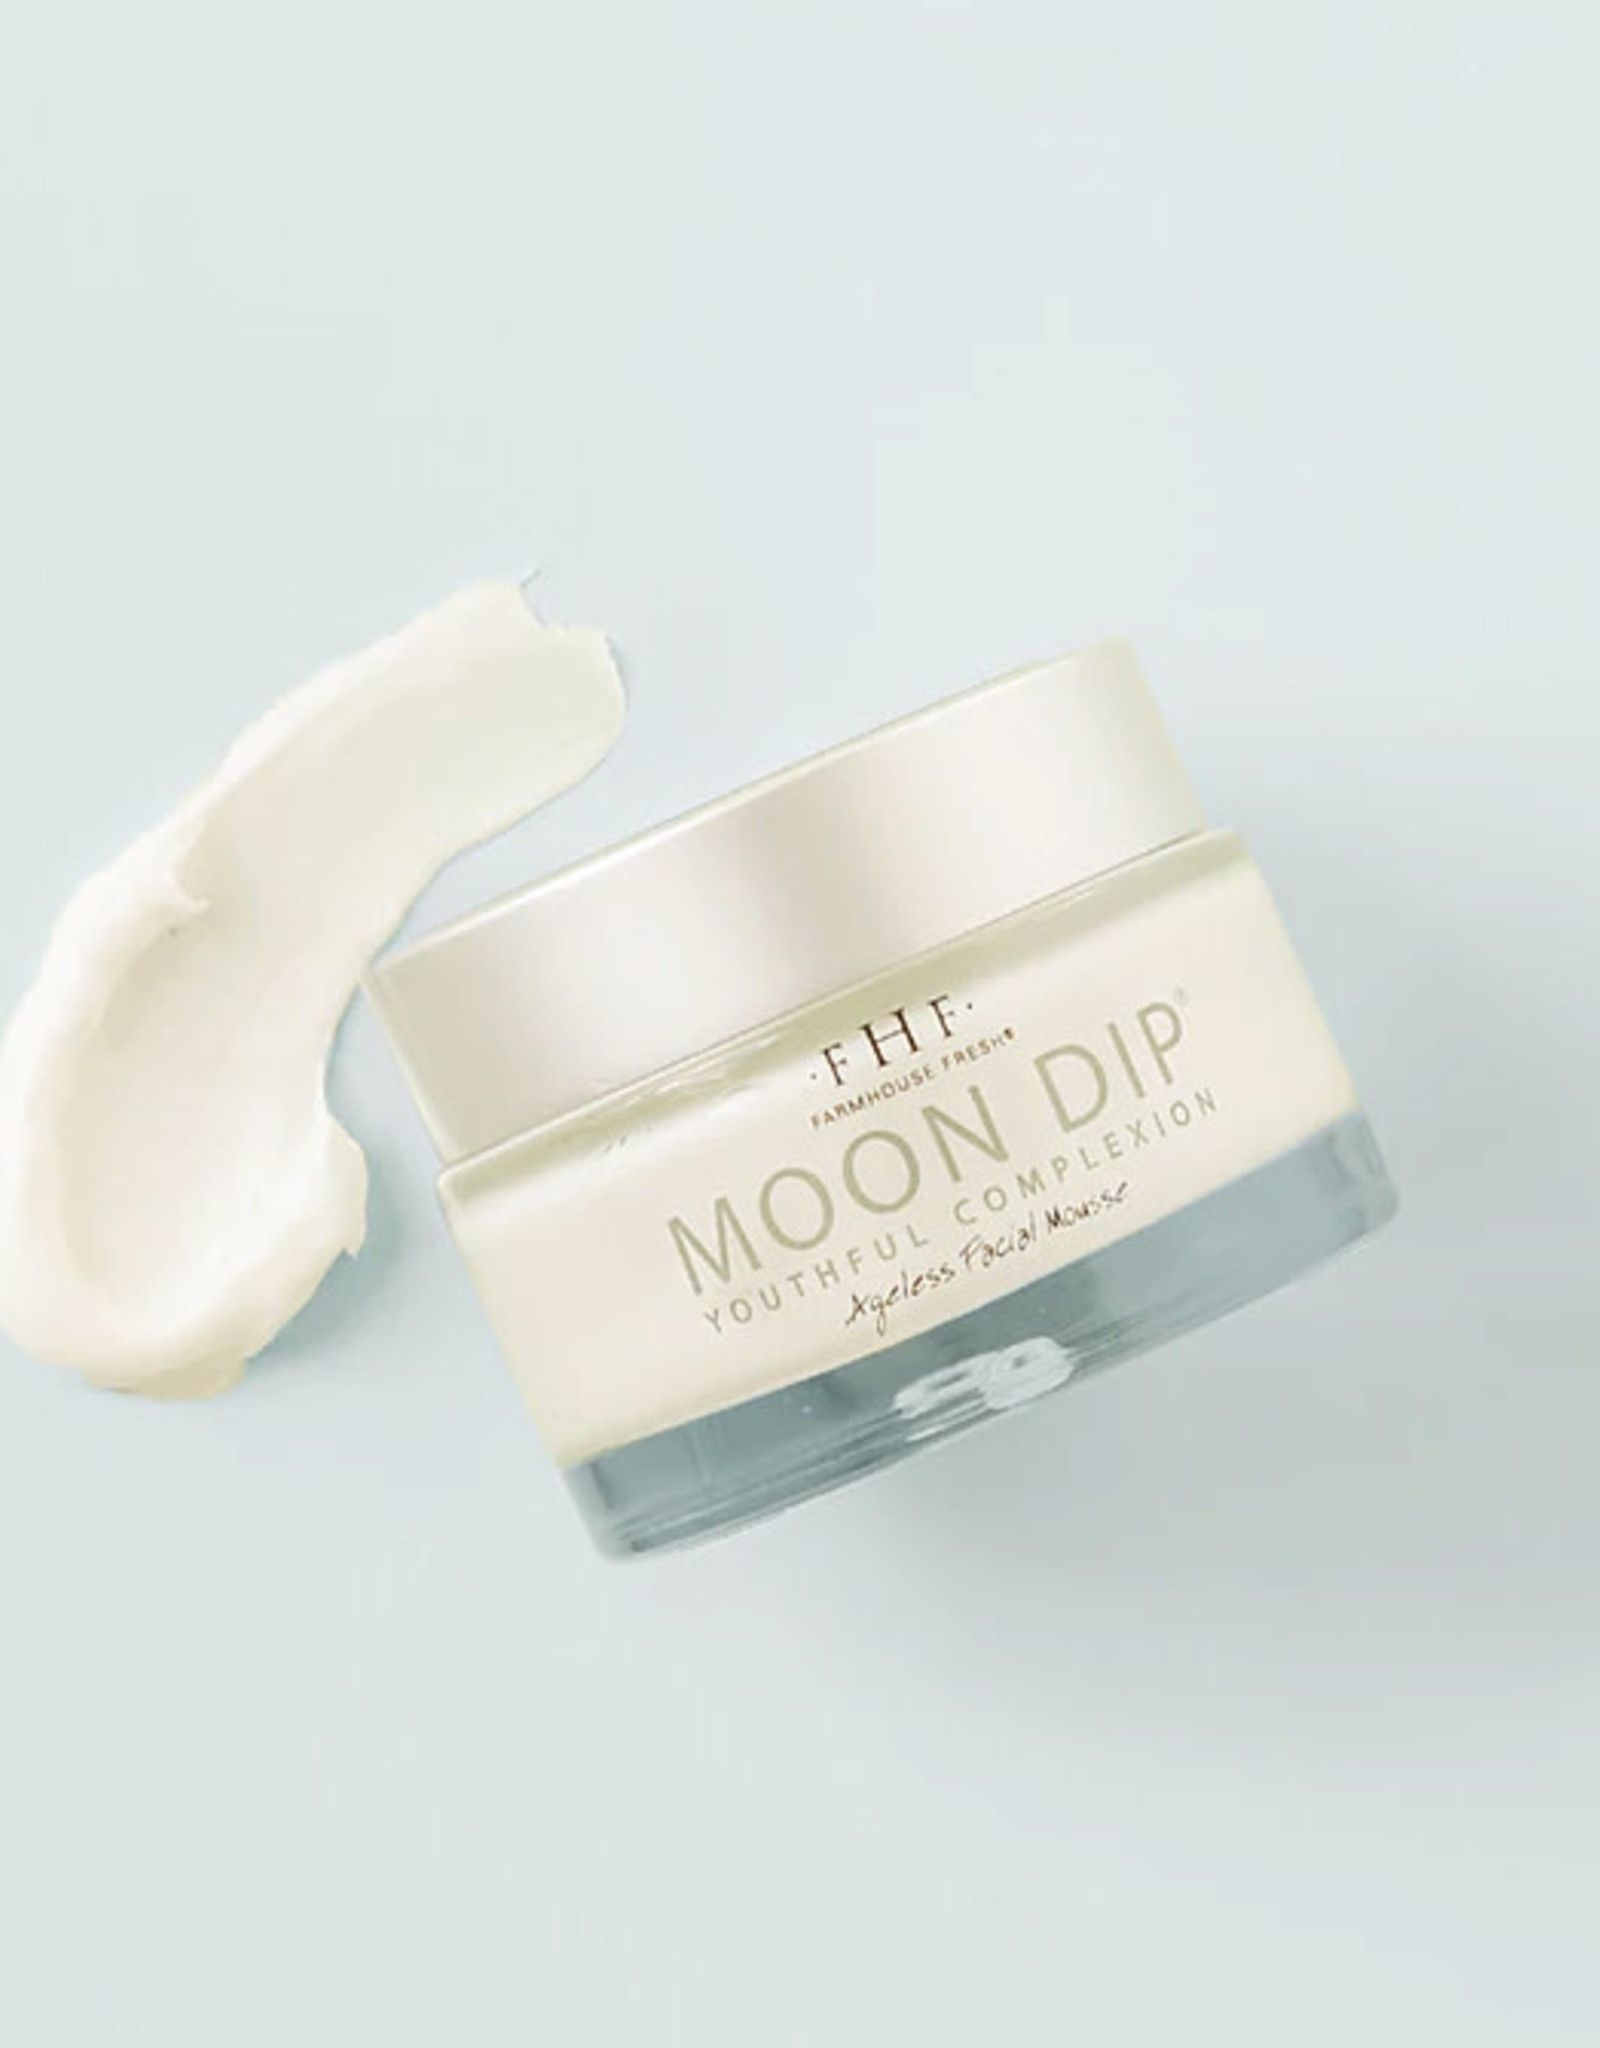 Farmhouse Fresh Moon Dip® Youthful Complexion Ageless Facial Mousse with Peptides + Retinol